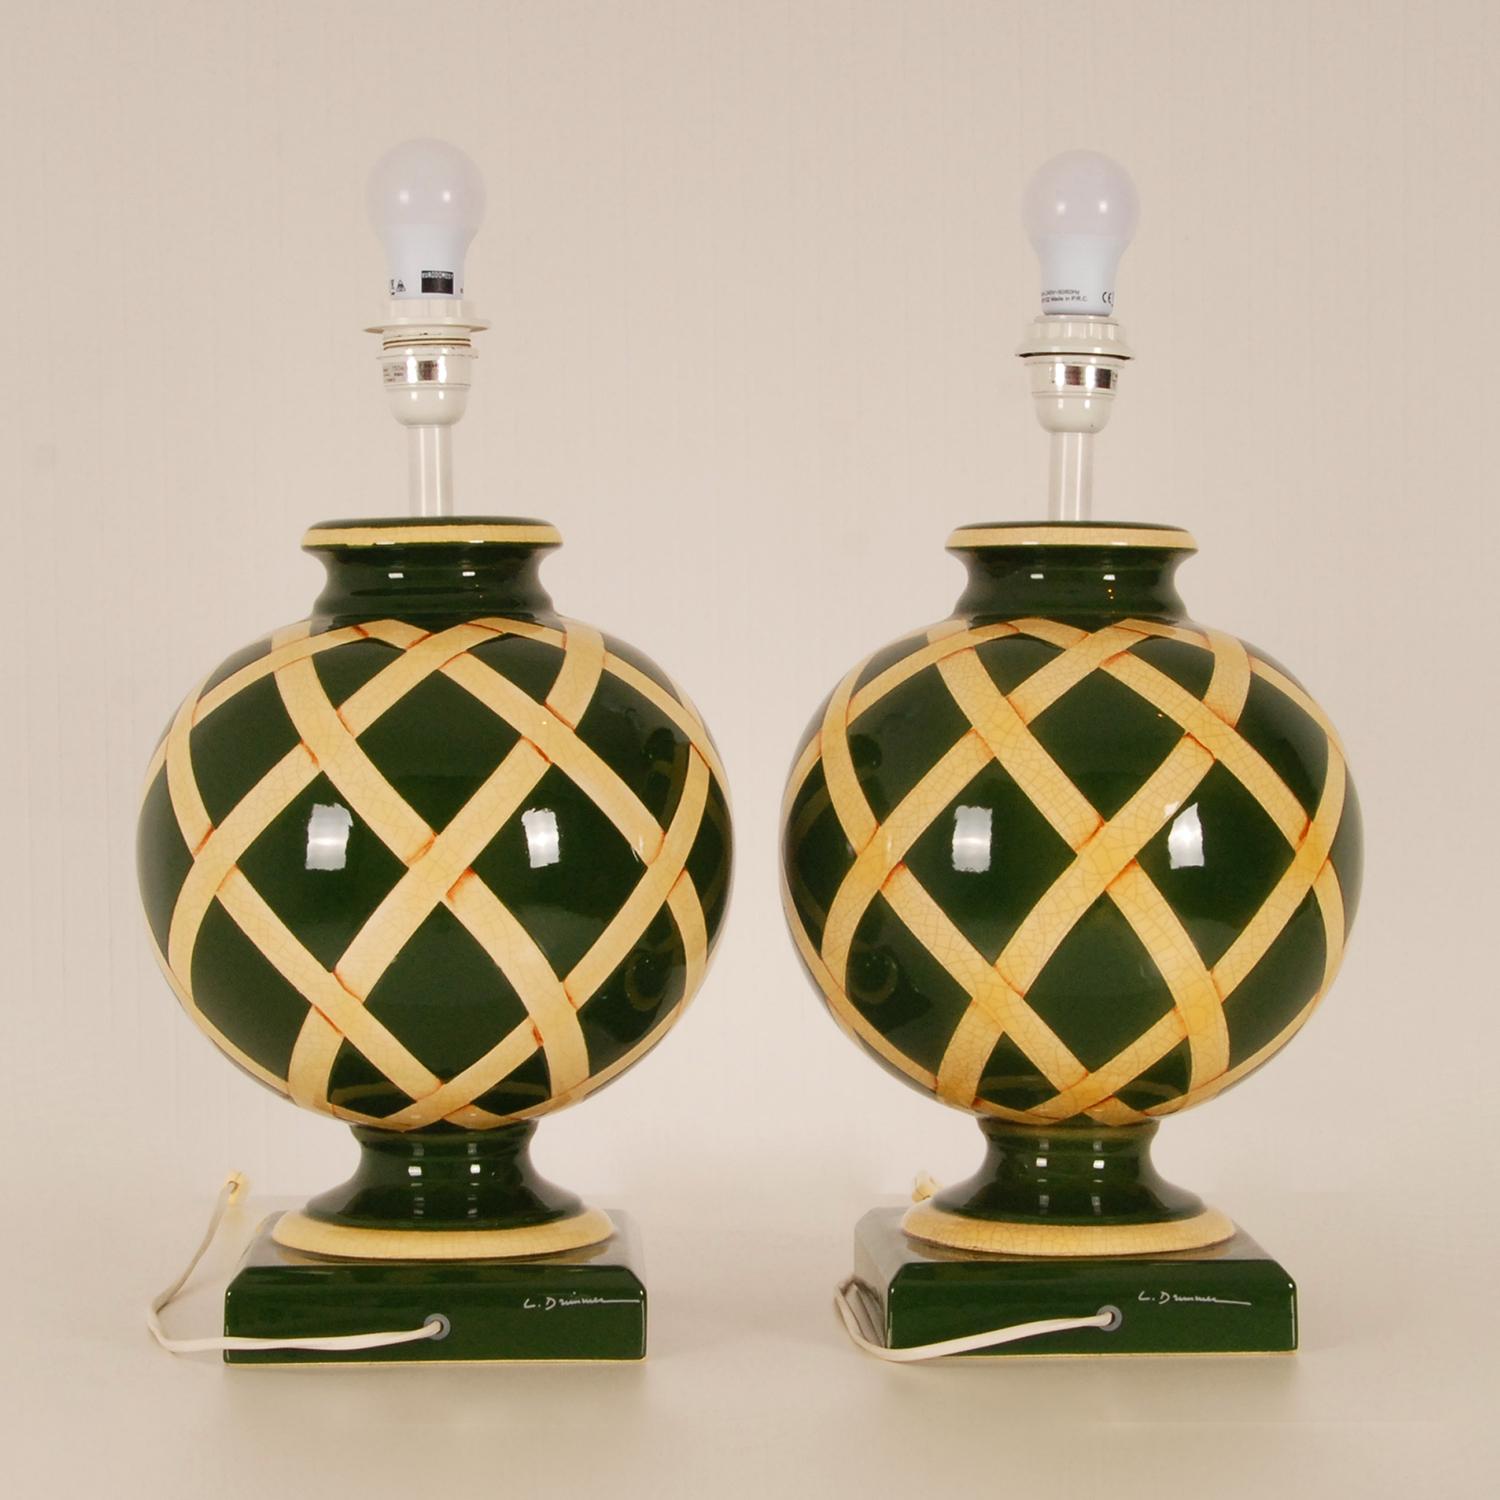 Vintage French Ceramic Vase Table Lamps Green Beige Argyle Pattern, a Pair For Sale 2